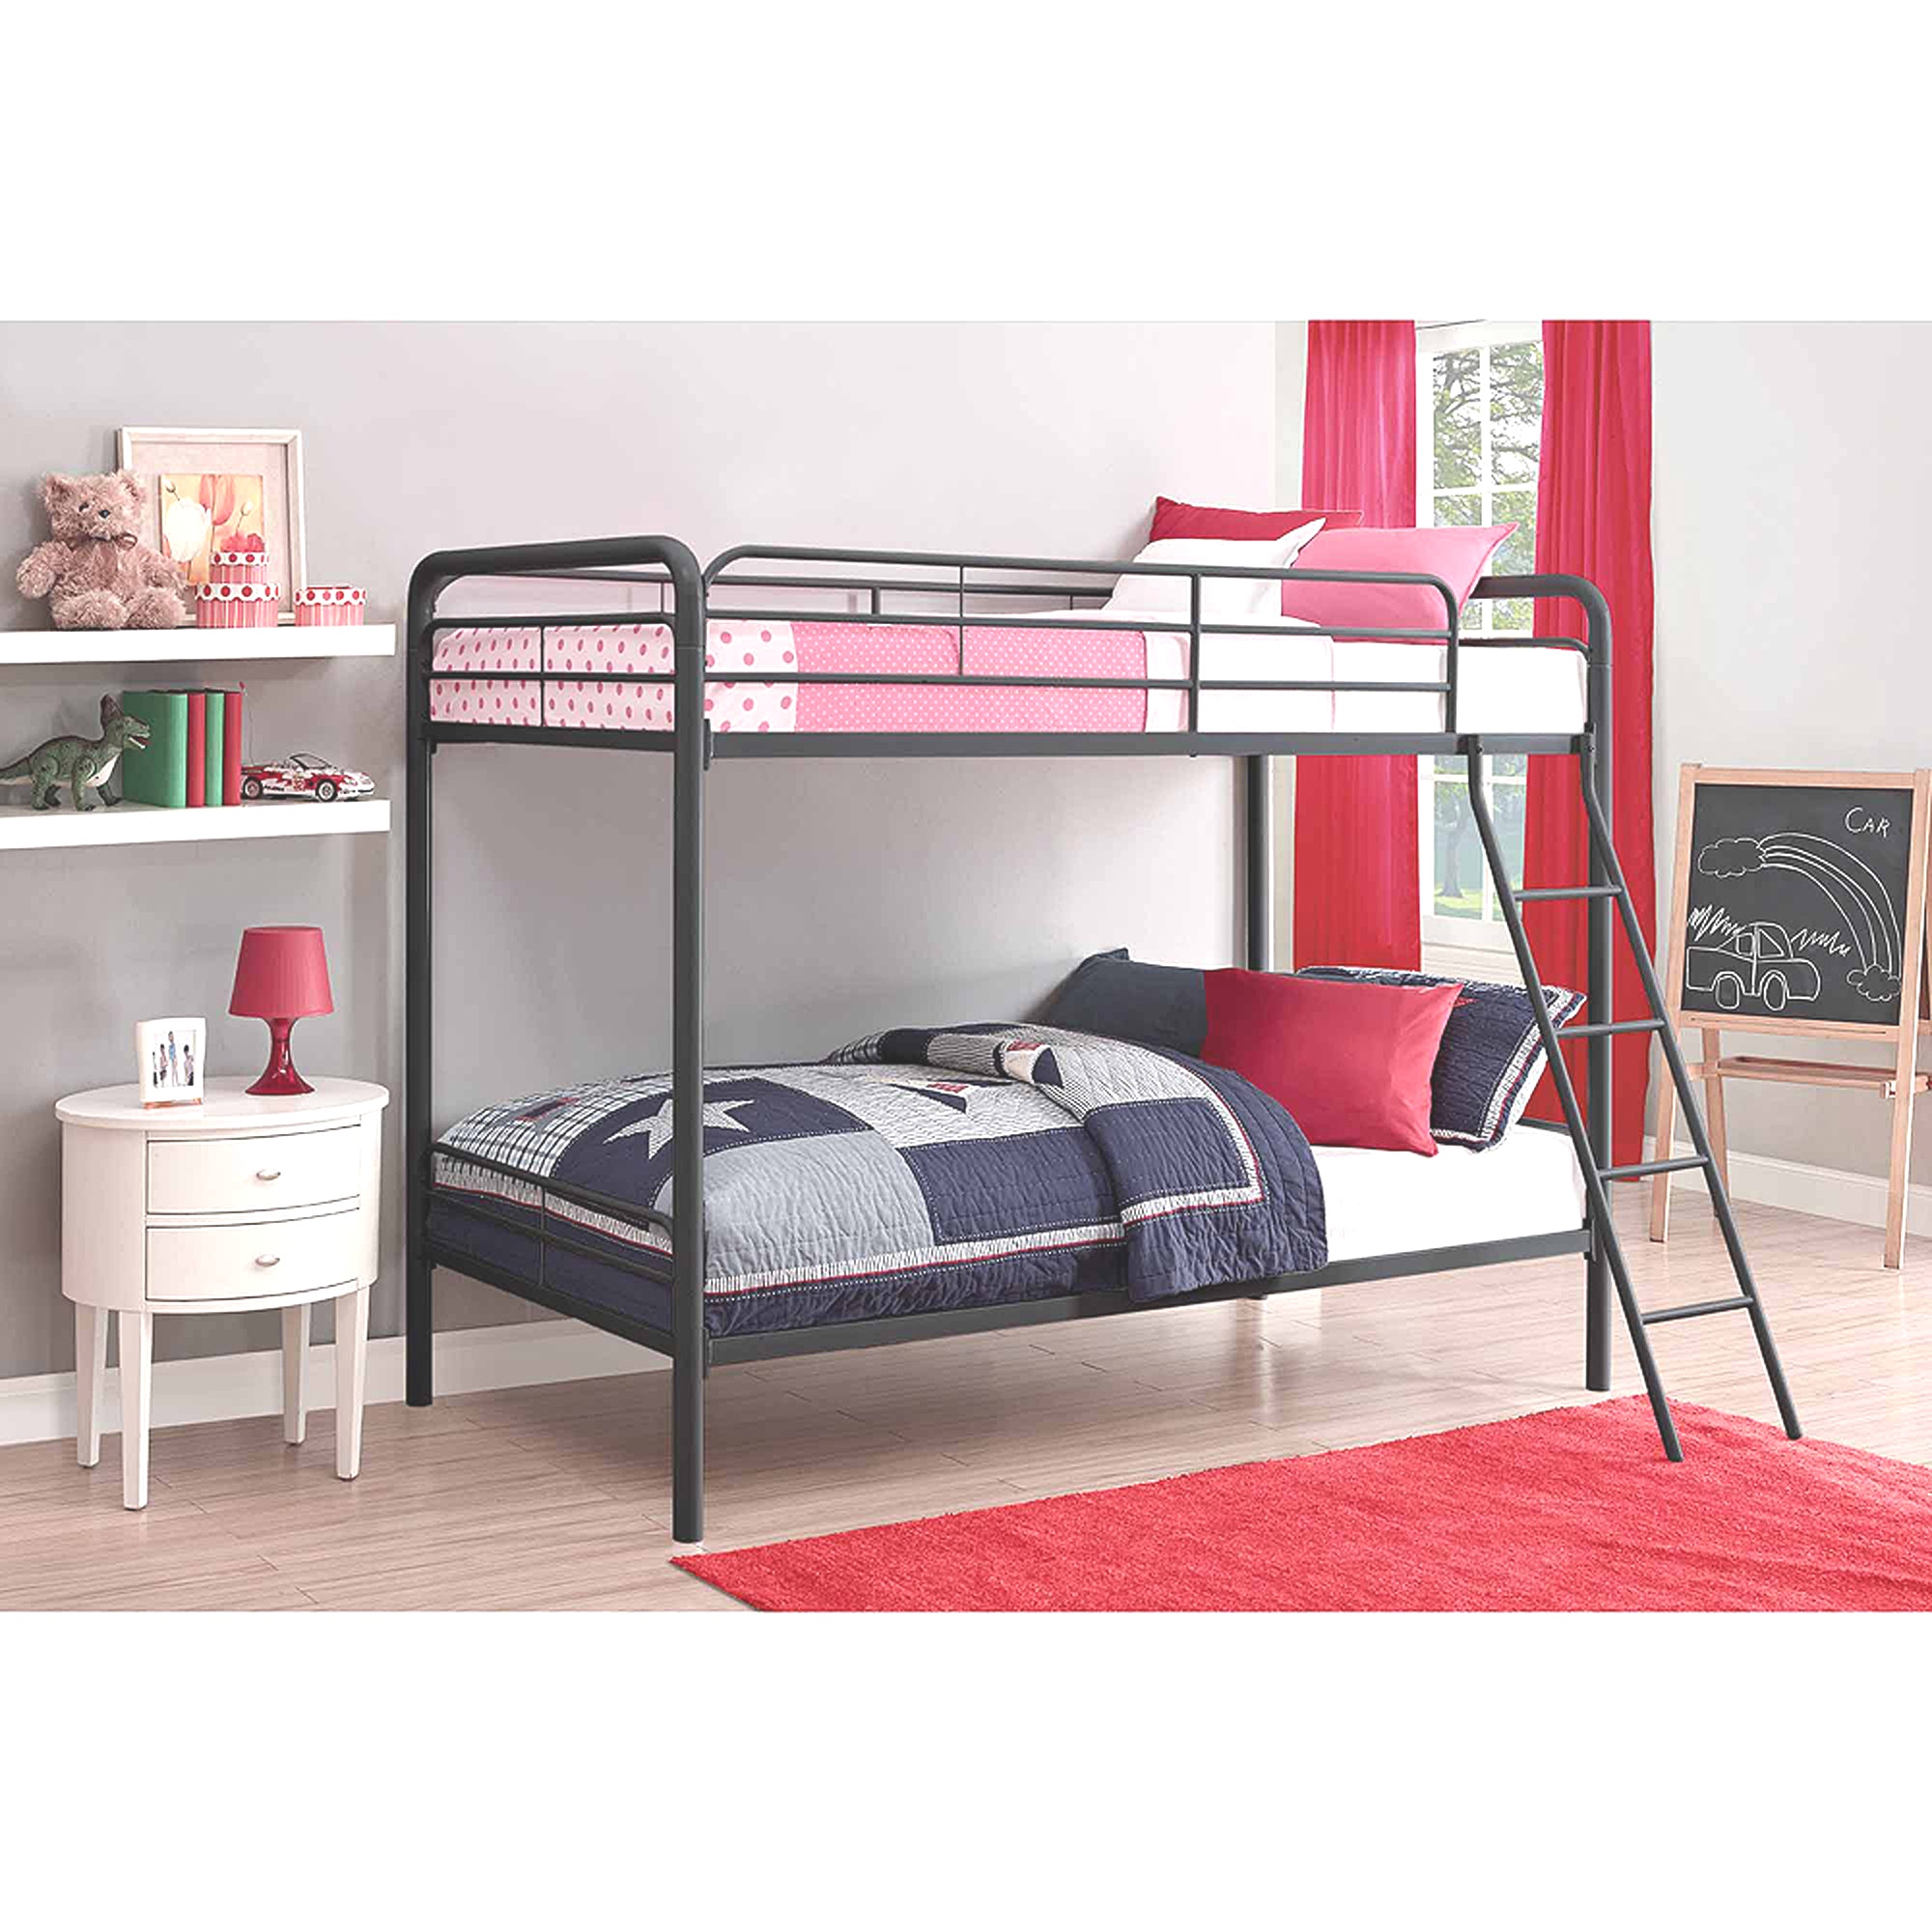 Allentown Twin Over Twin Bunk Bed Espresso | Bunk Beds : Twin Over Twin Bunk Bed With Slide allentown twin over ..